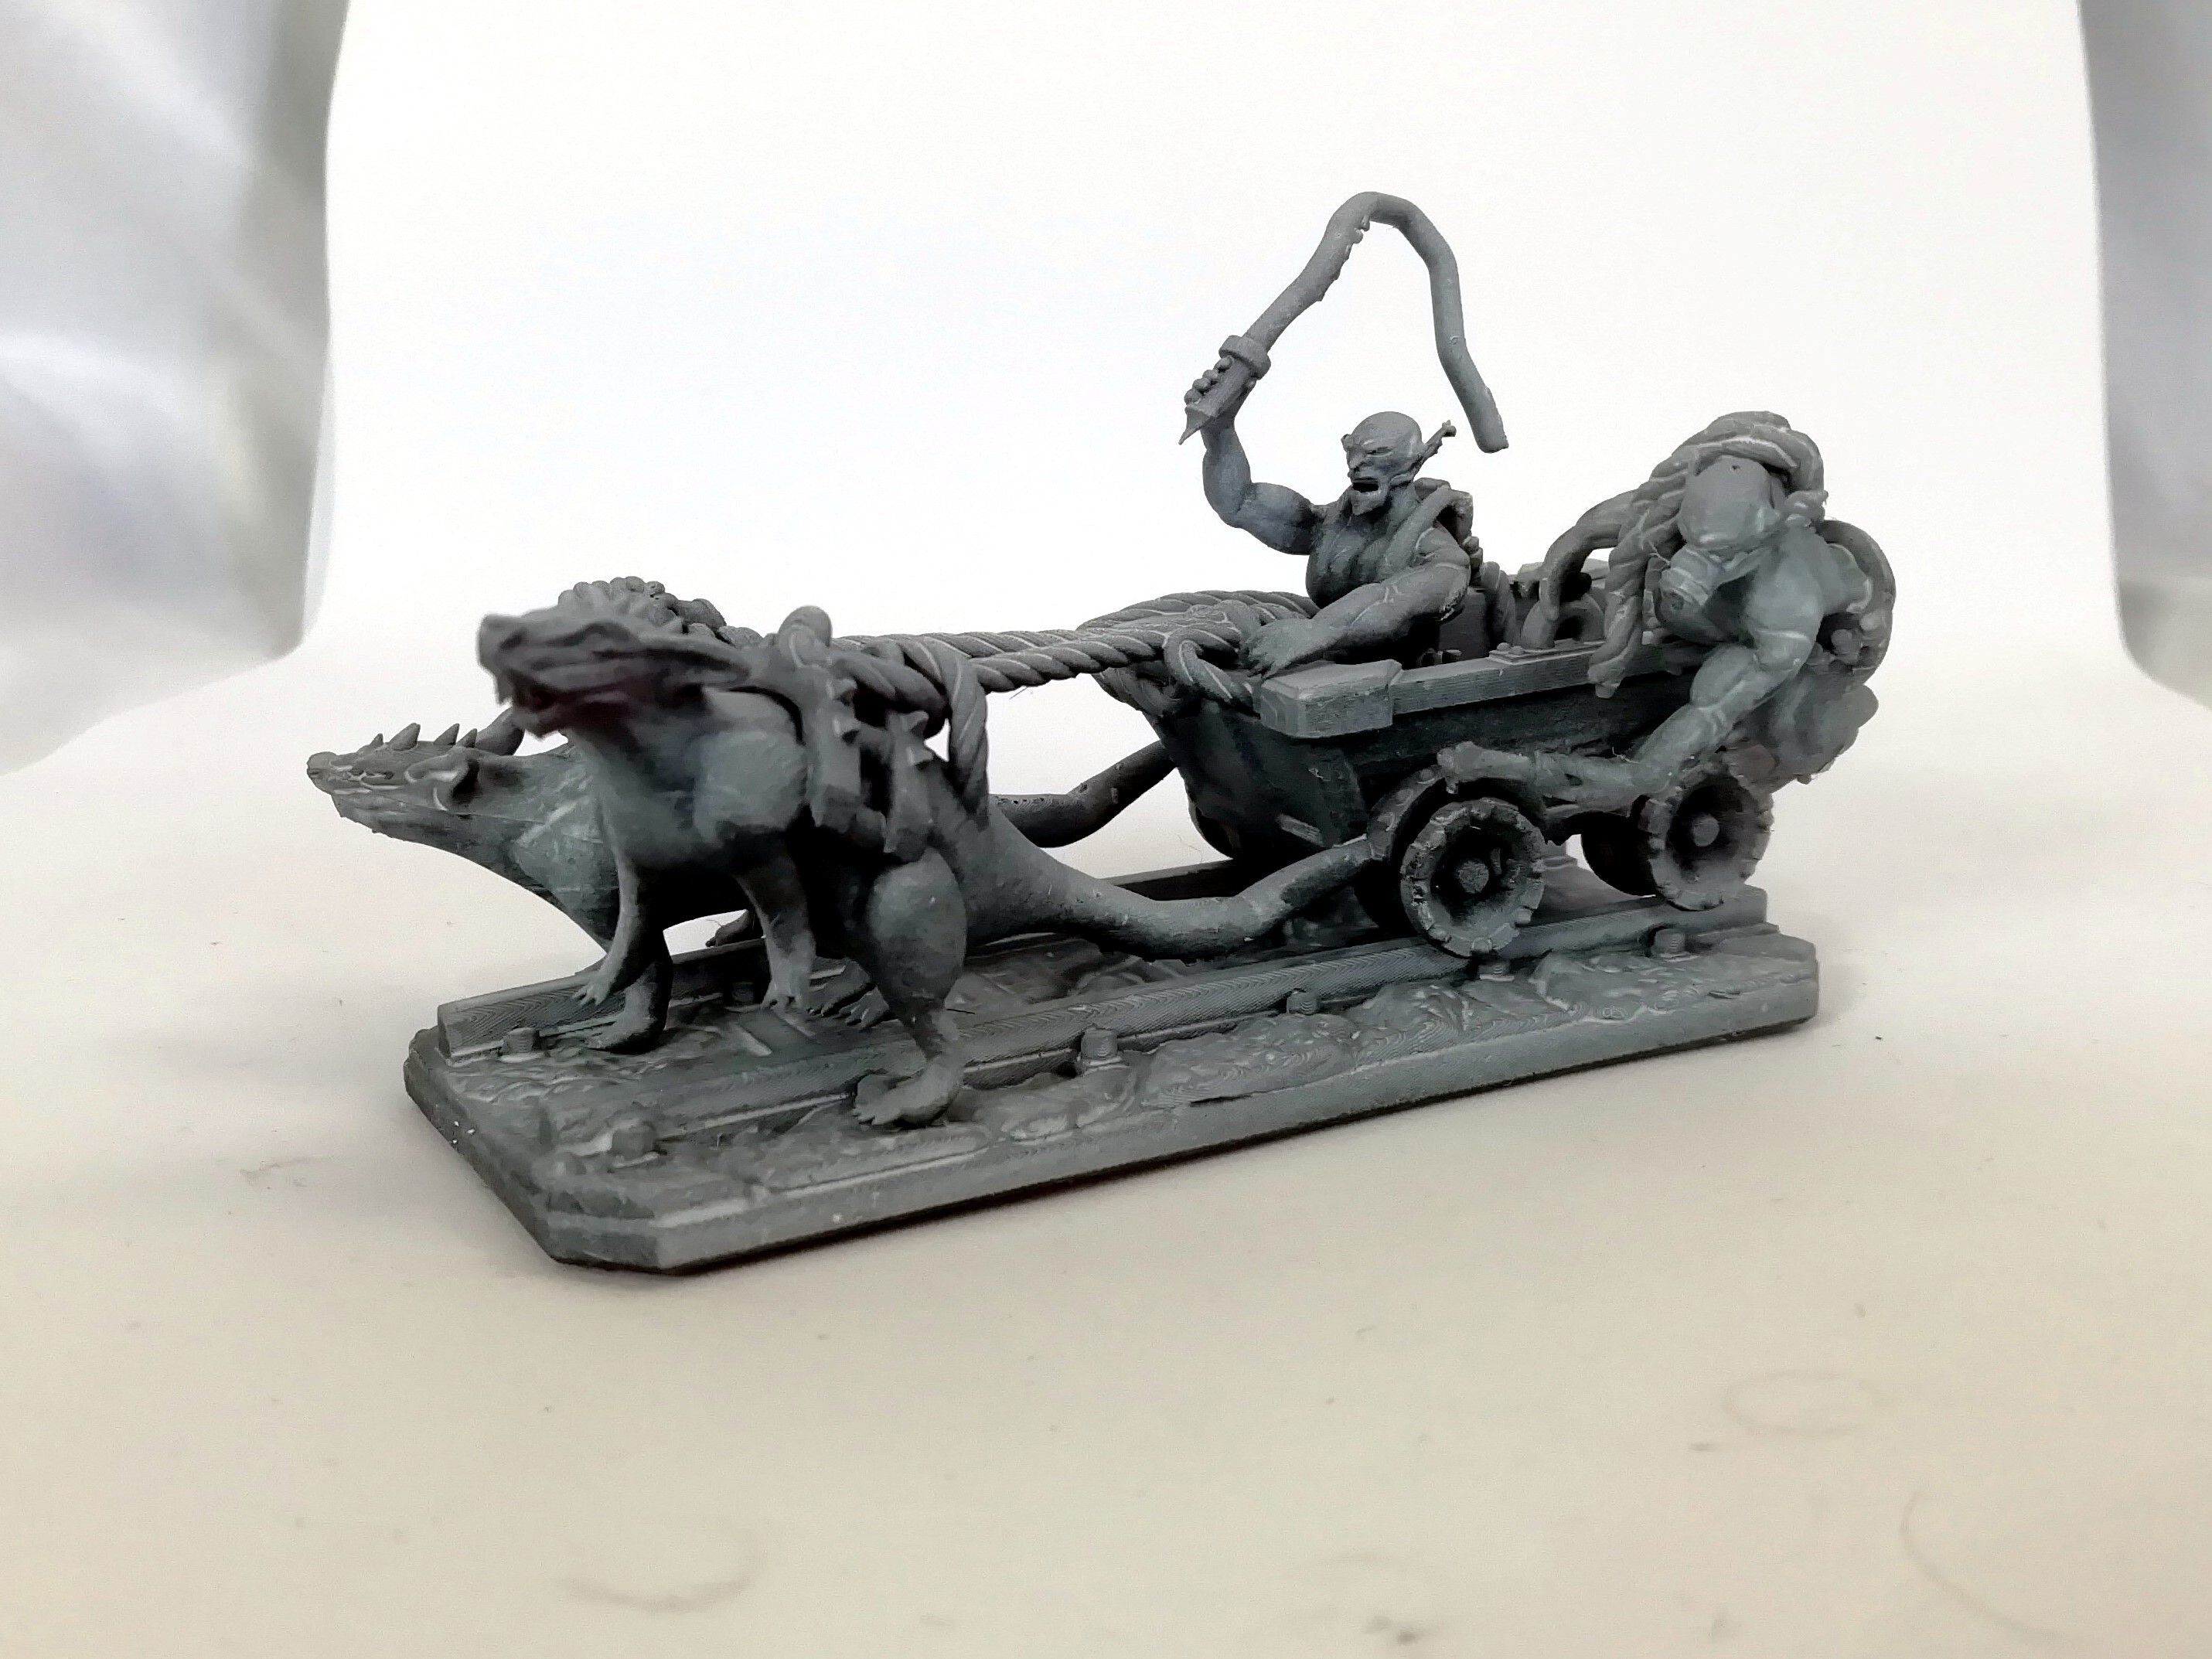 Goblin mine cart riders (6).jpg Download STL file Goblin mine cart riders with rat mounts • 3D printing template, MysticPigeonGaming